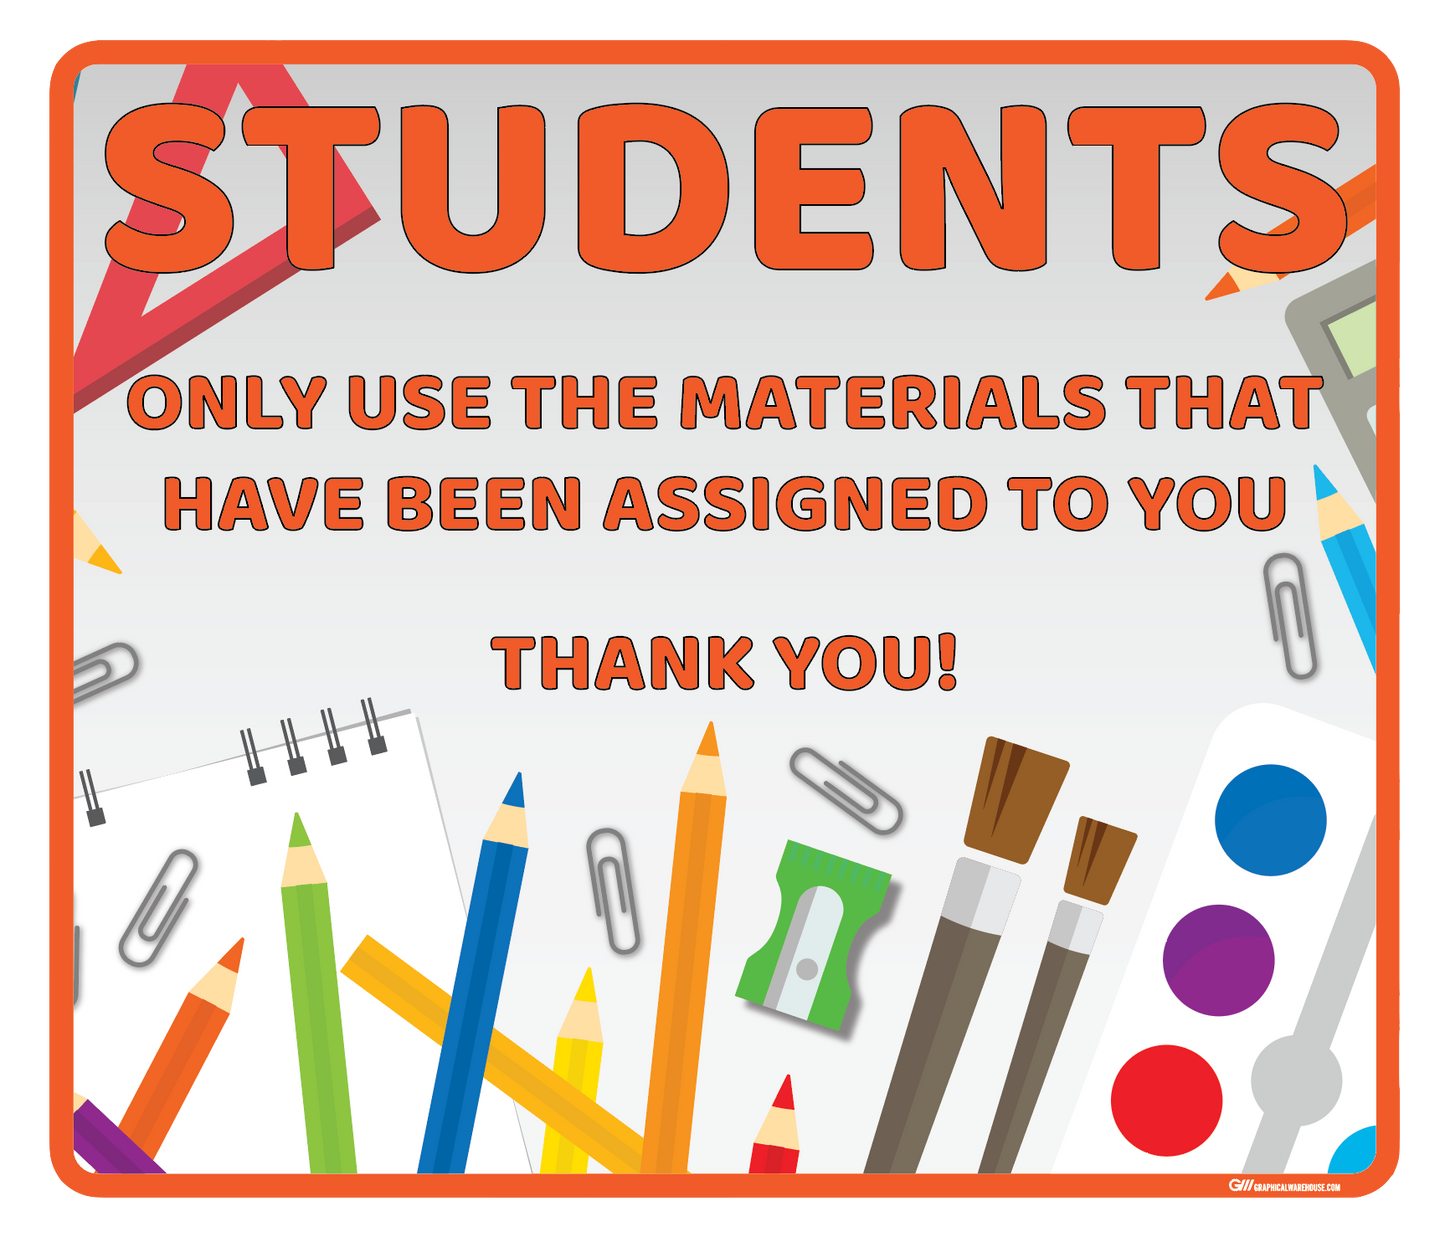 "Students Use Assigned Materials" Adhesive Durable Vinyl Decal- Various Sizes/Colors Available